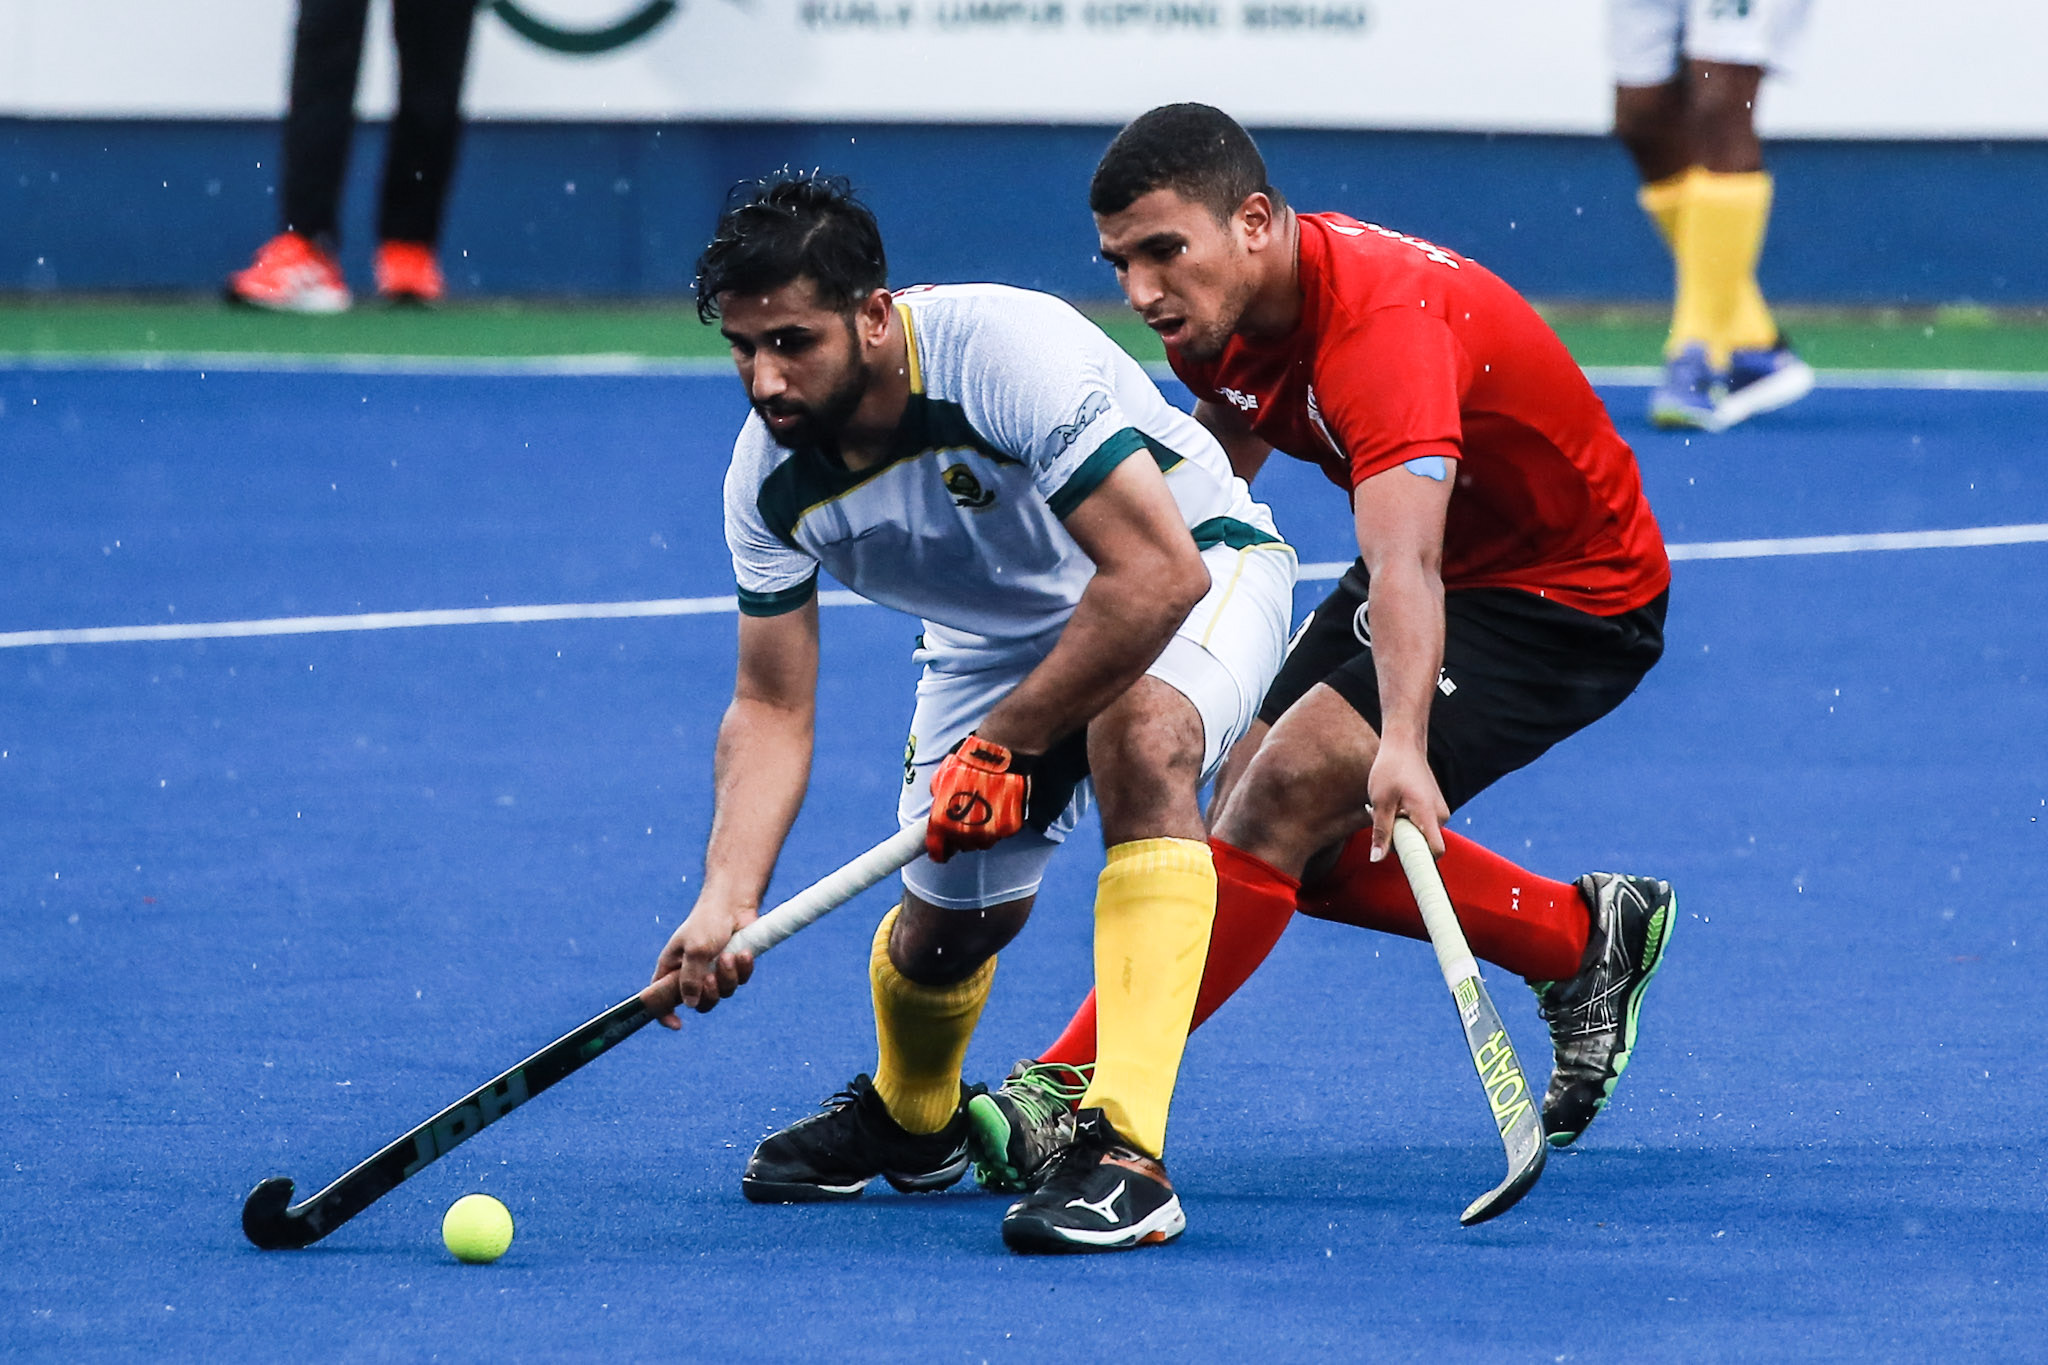 Egypt's Ismail Abdalla Hossameldin Ragab tries to stop South Africa's Mohamed Mea